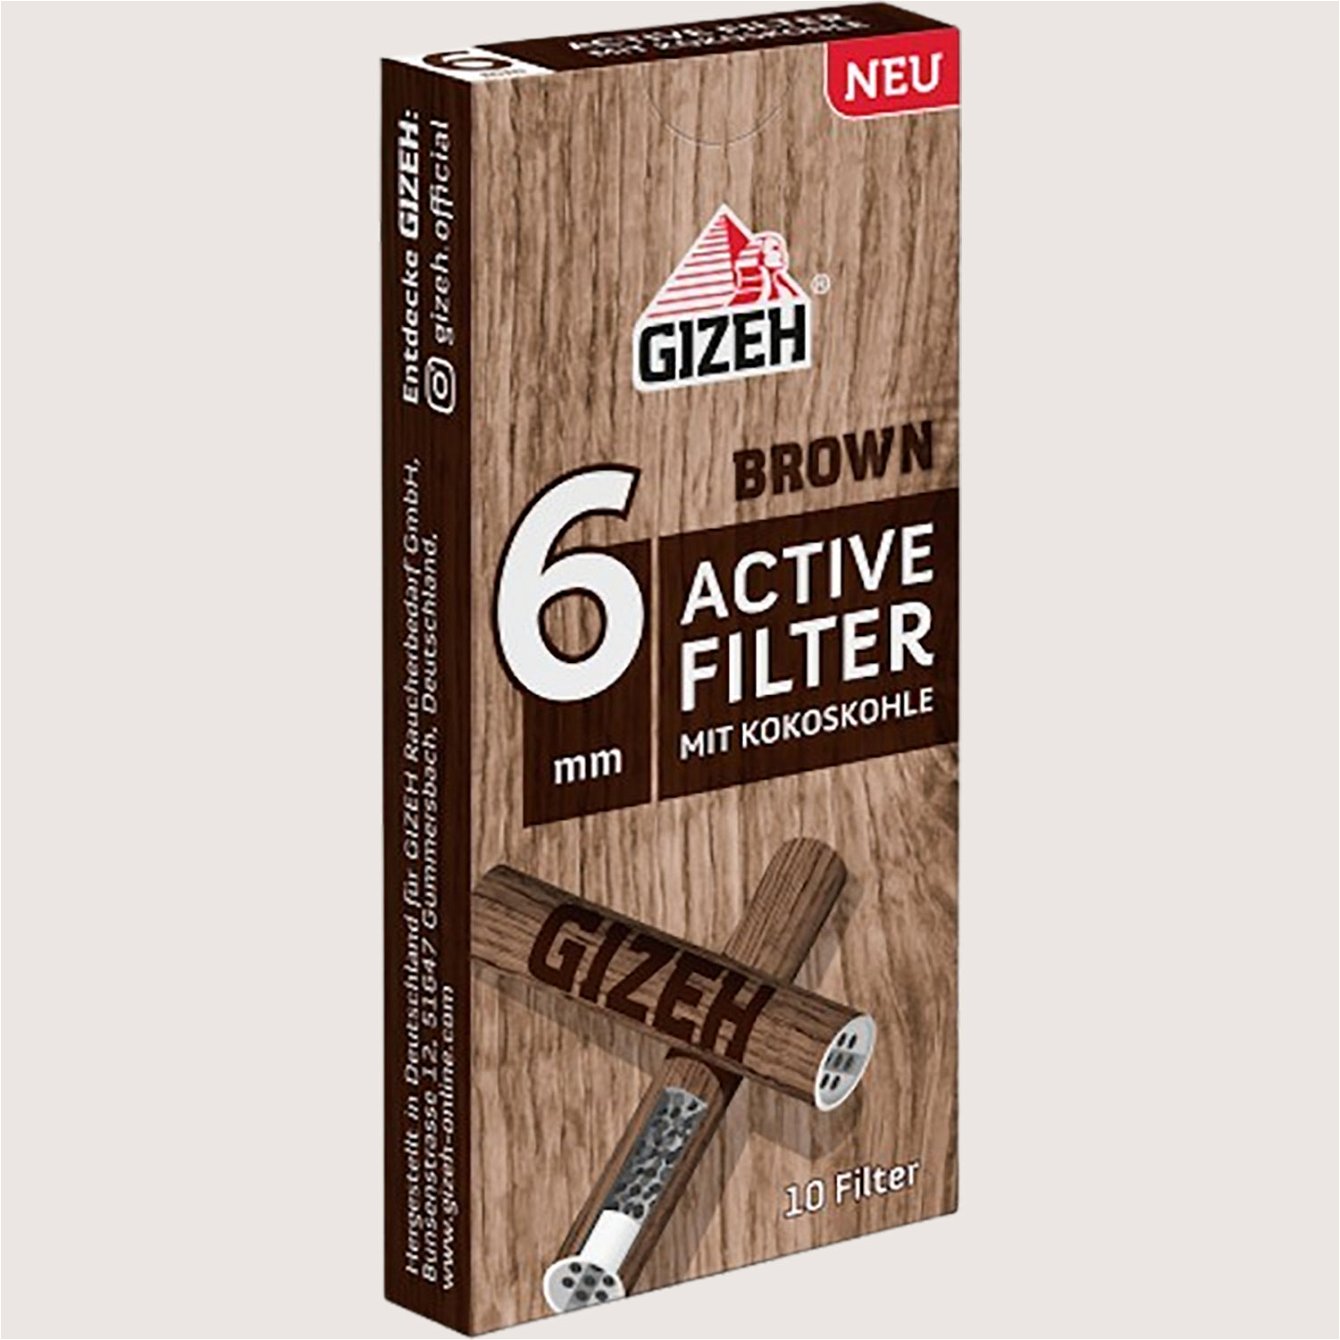 Gizeh Brown Active Filter 6 mm 10 Filter